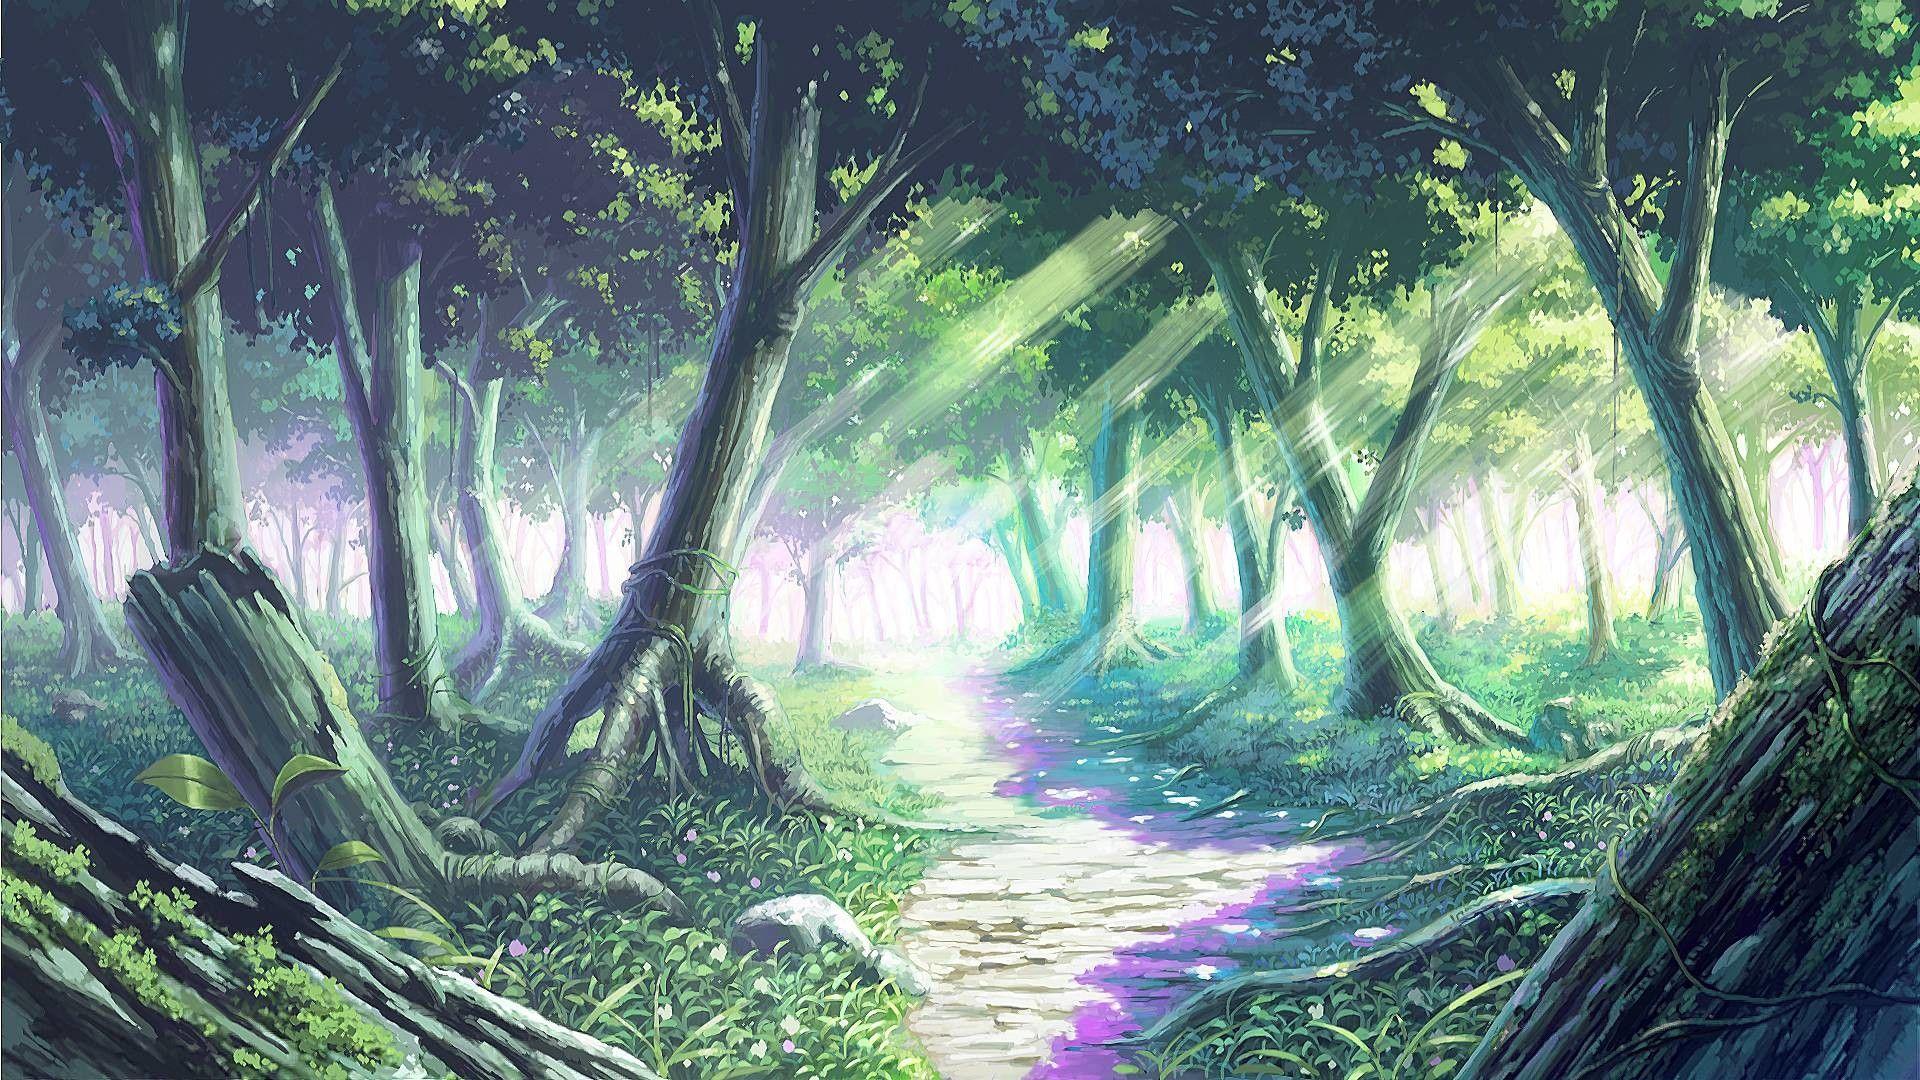 Anime Backgrounds Forest Wallpaper Cave